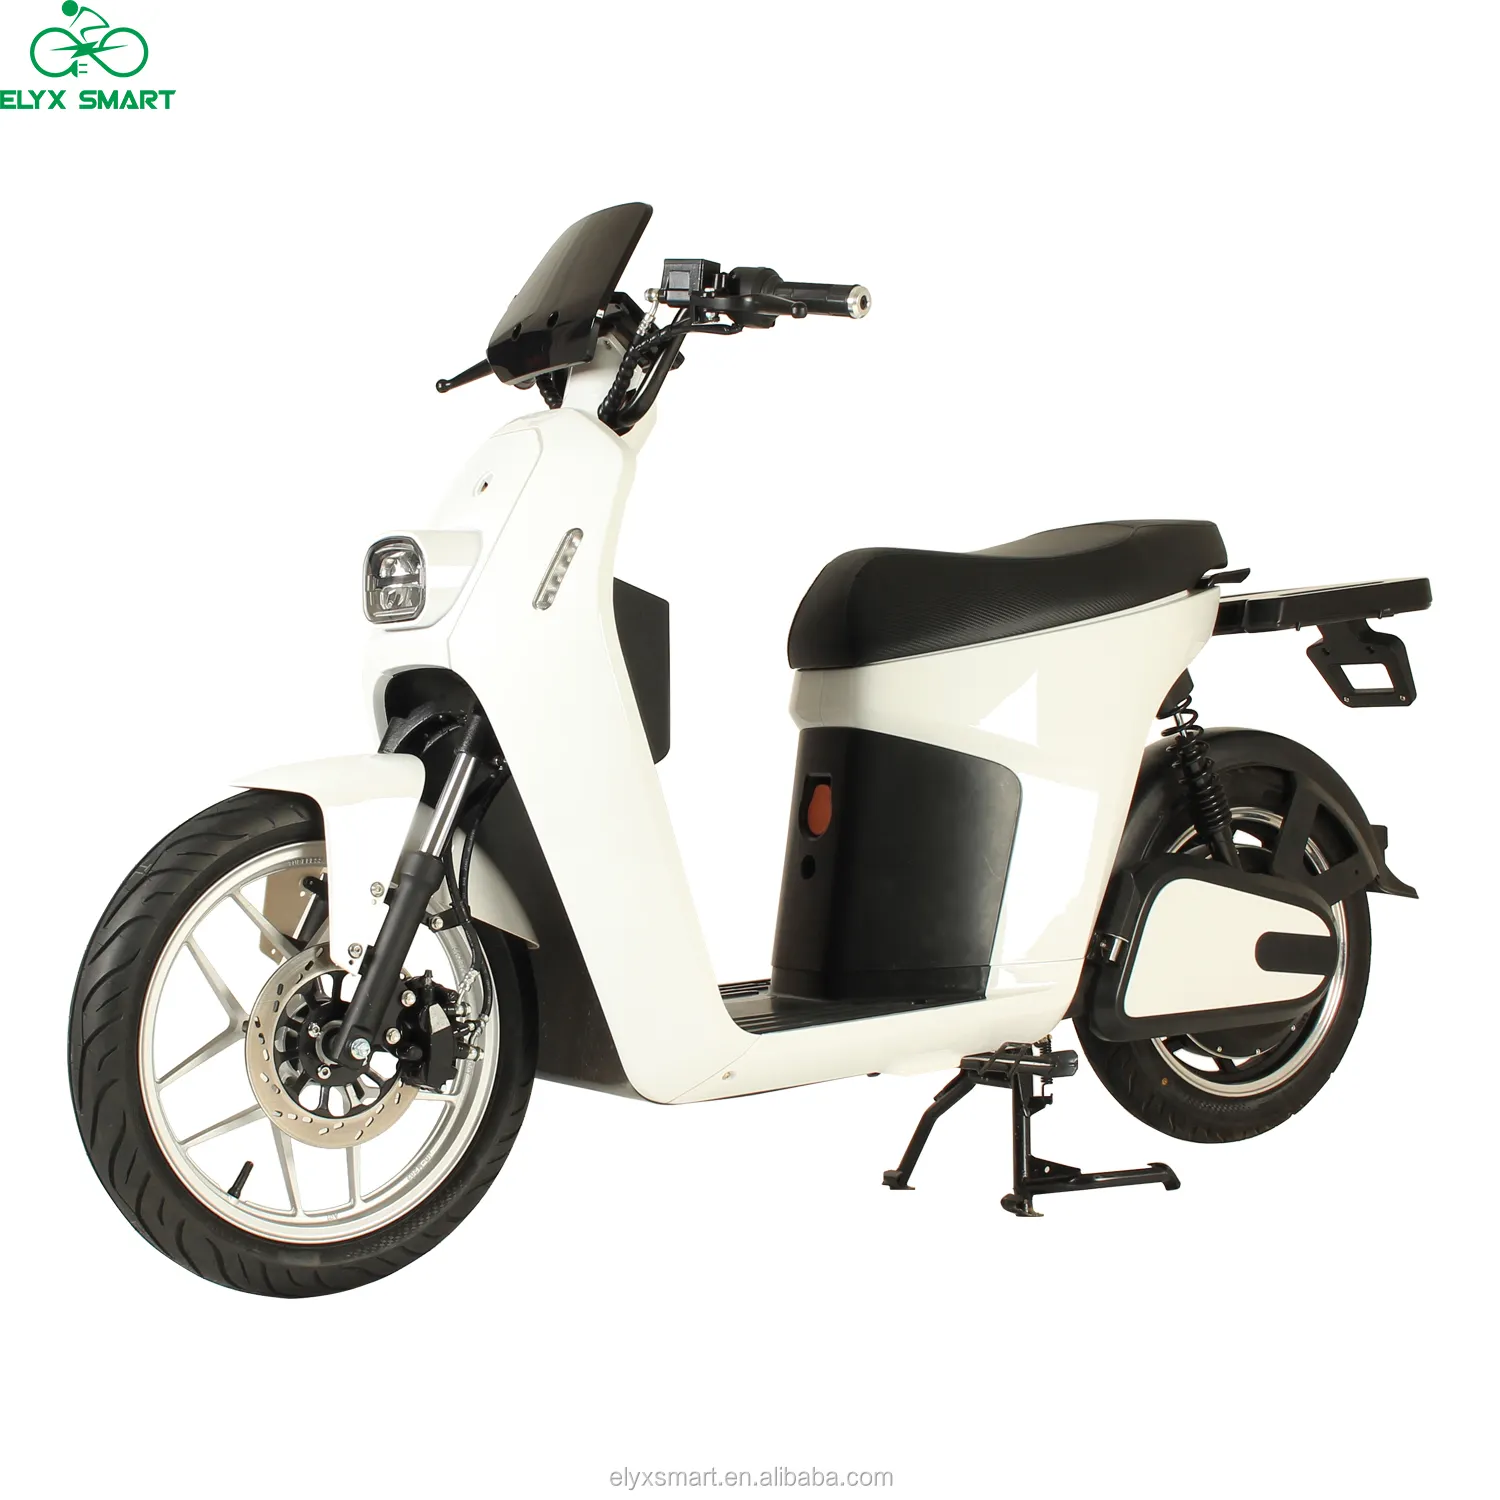 Elyx Liber 2 Wheel Adult Street Motorcycles Electric Motor Bike City Scooter 60V 2000W Moped